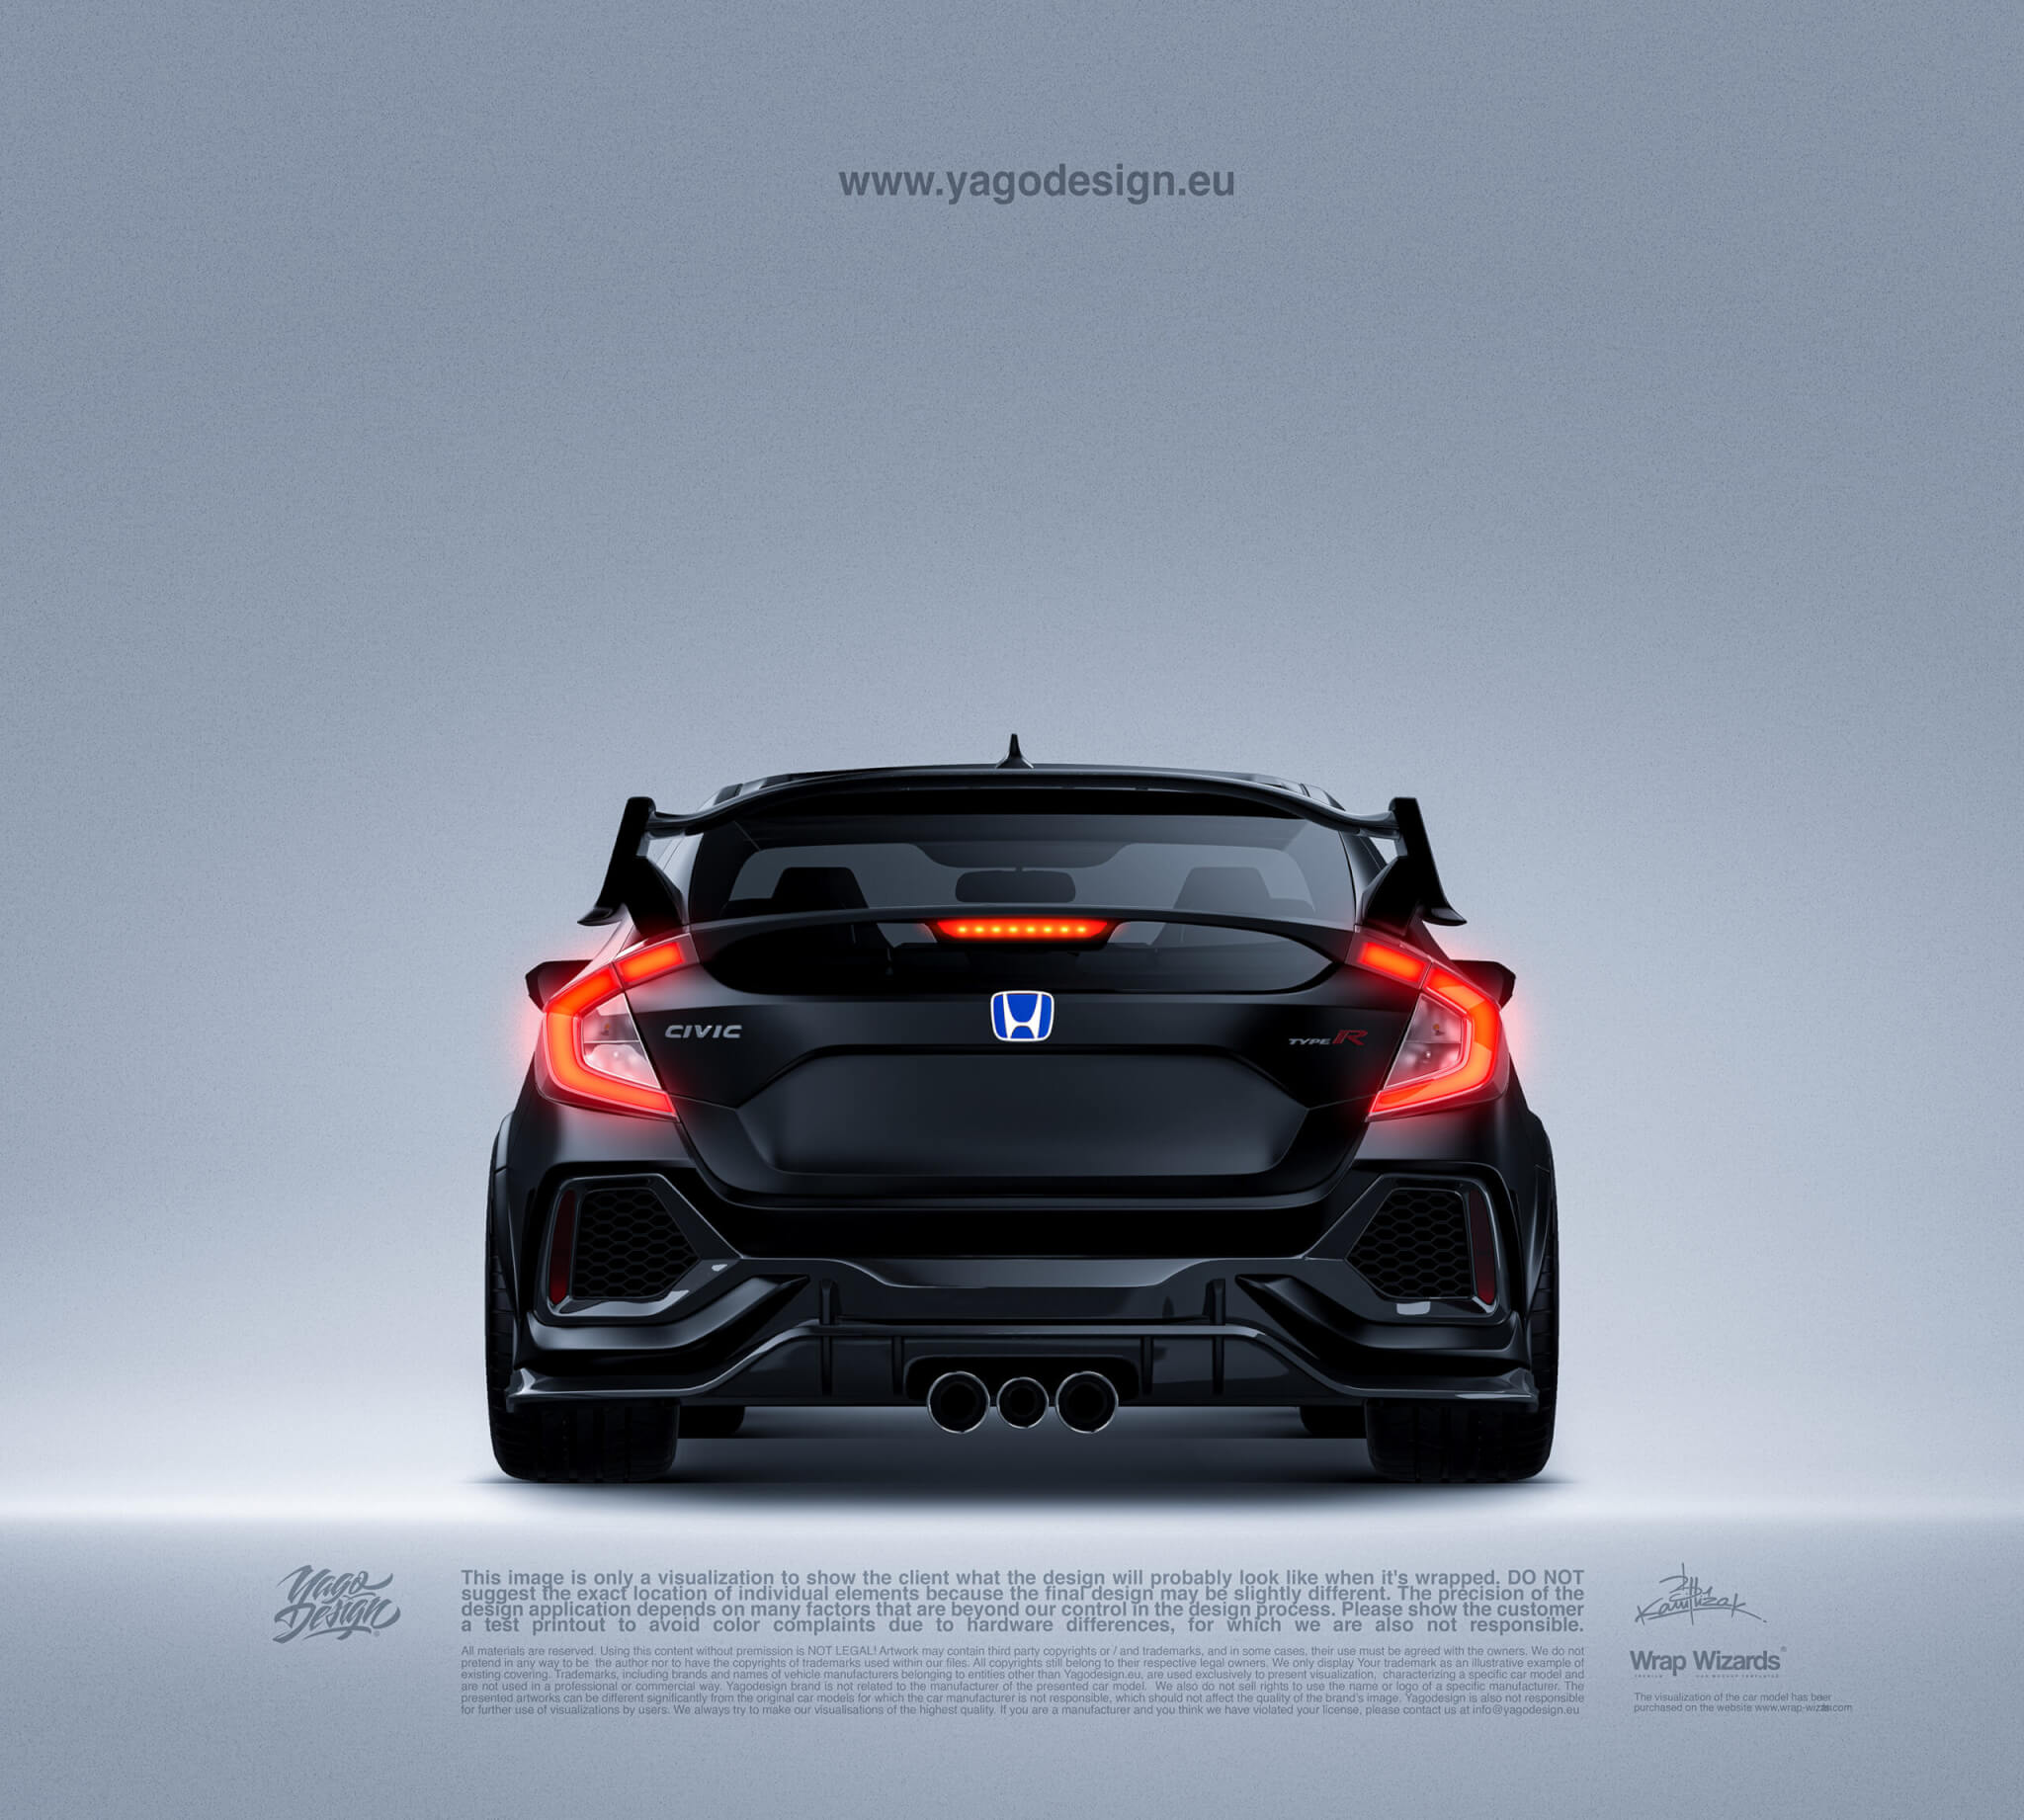 HONDA-CIVIC-TYPE-R-2018-SONIC-REAR-BY-YAGODEIGN